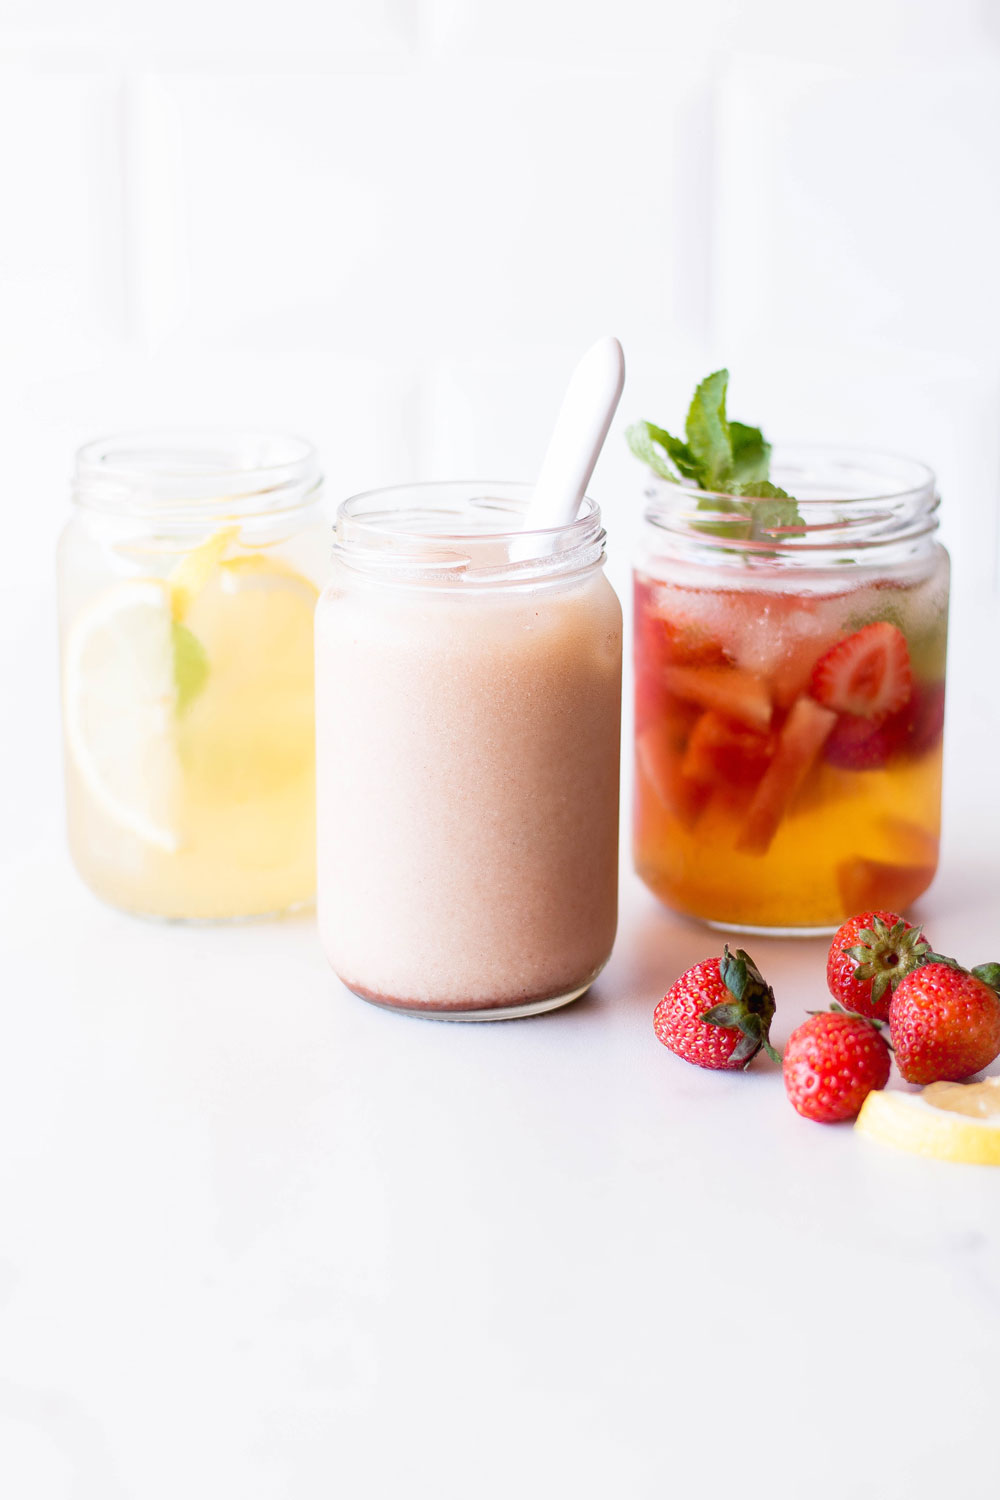 These three cold-brewed summer tea recipes are extremely refreshing and perfect for helping you stay hydrated during the hot summer months! https://www.spotebi.com/recipes/cold-brewed-summer-teas/